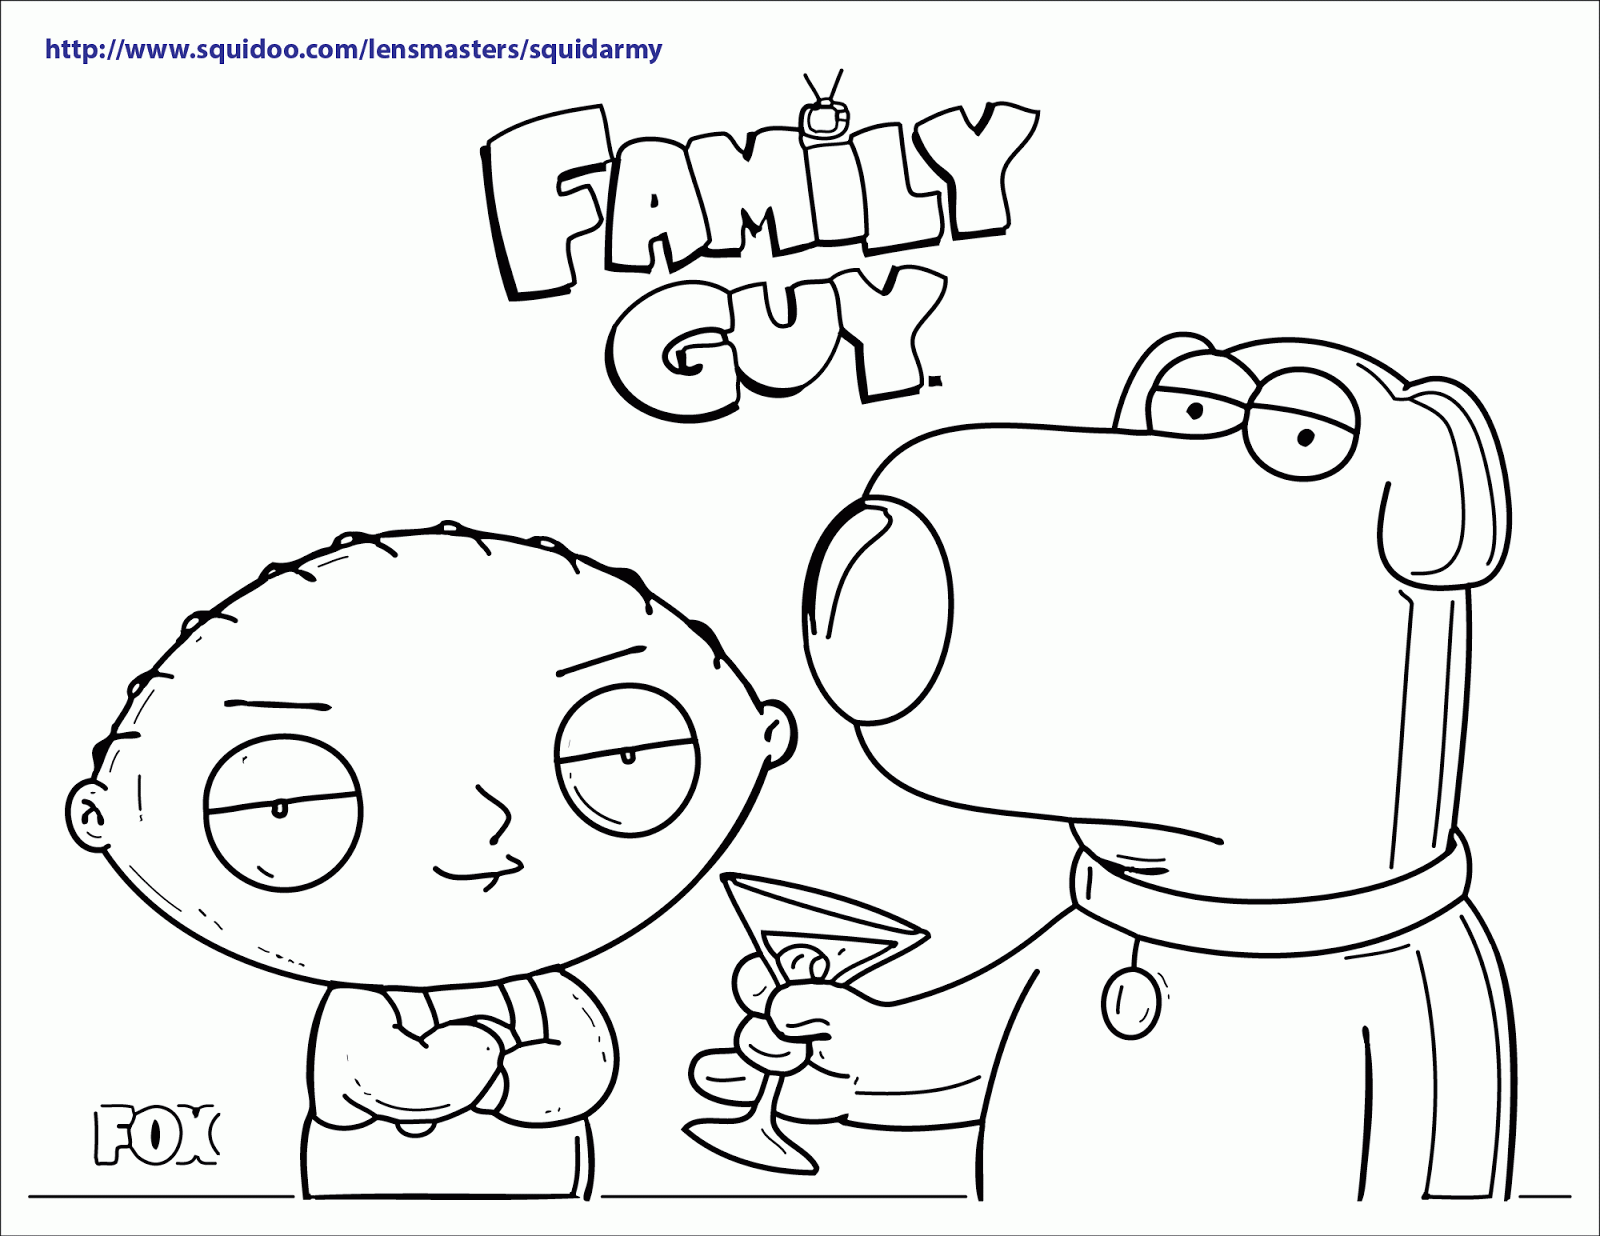 Free Stewie Family Guy Coloring Pages, Download Free Stewie Family Guy ...